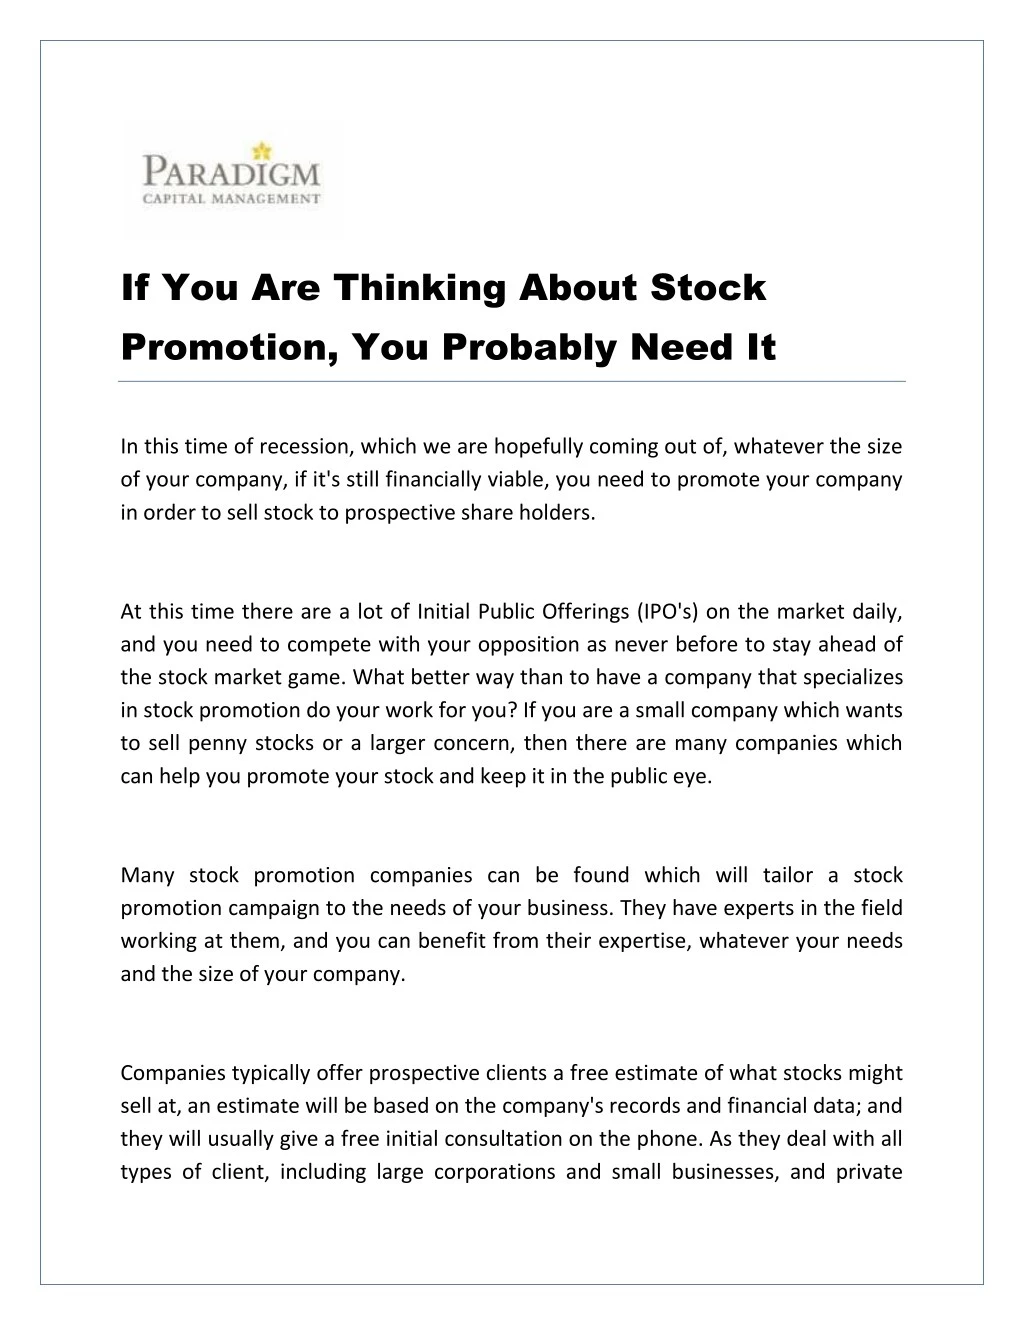 if you are thinking about stock promotion